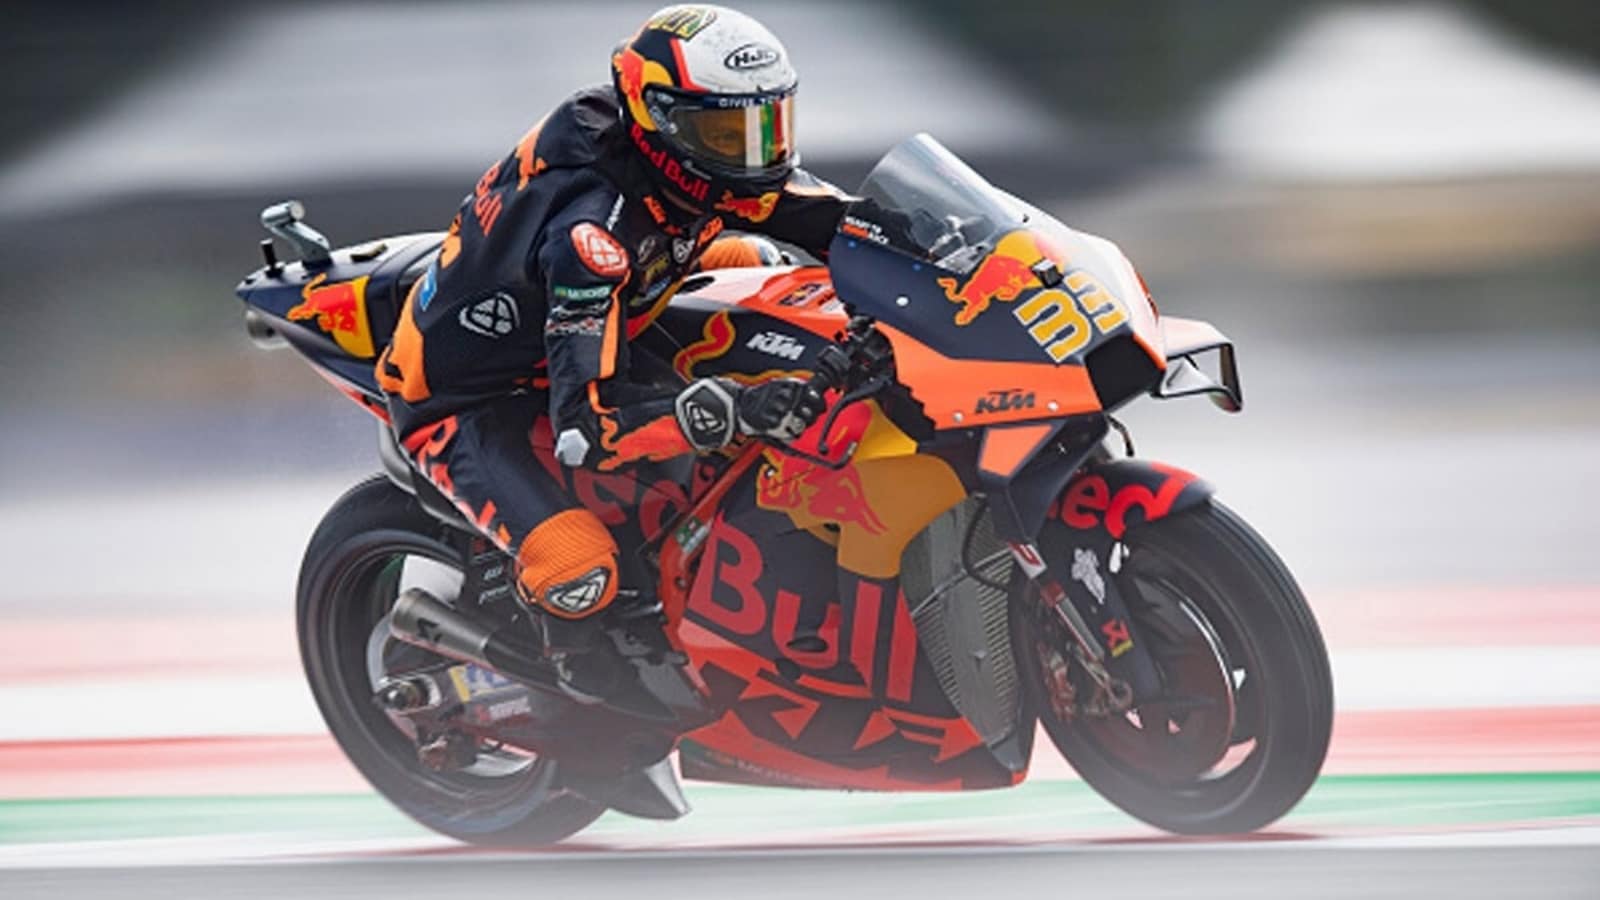 Brad Binder wins in Austria after tyre gamble pays off - Hindustan Times